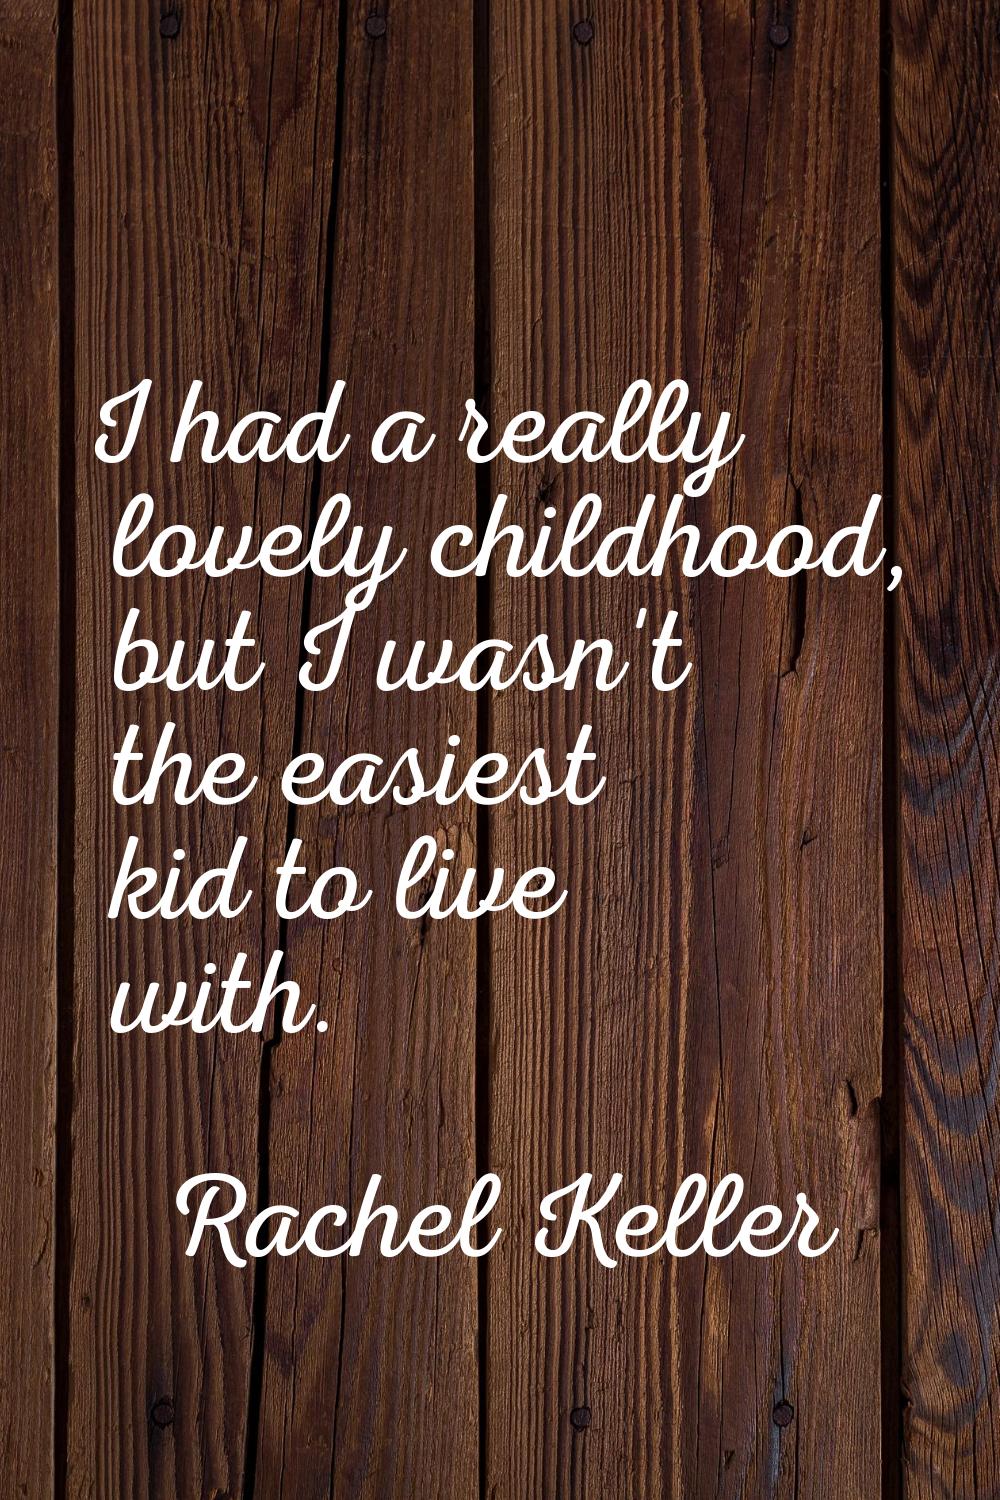 I had a really lovely childhood, but I wasn't the easiest kid to live with.